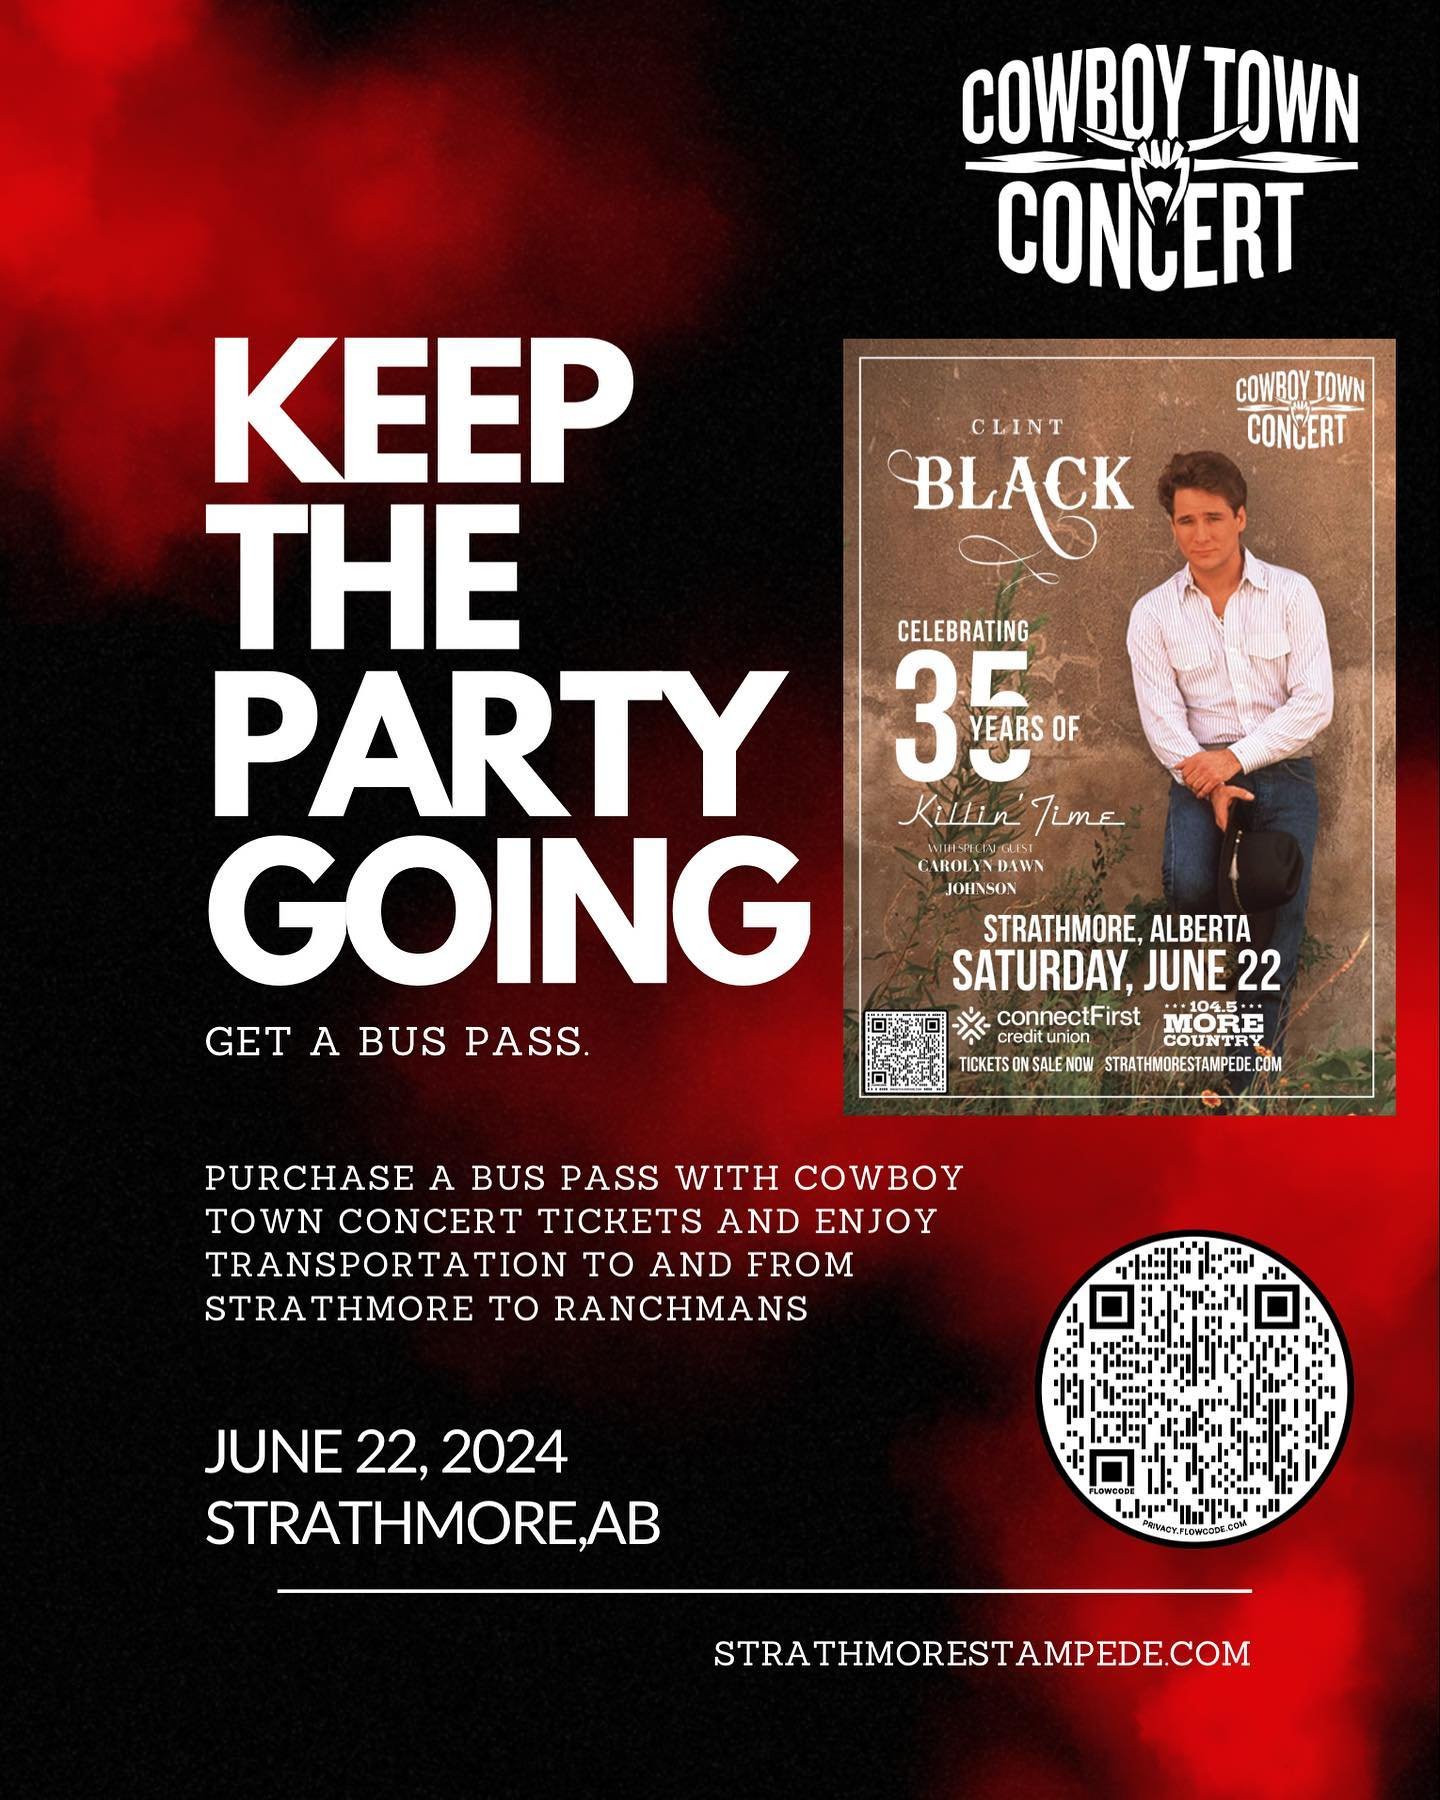 CALGARY!! 

Hop on the bus at Ranchman&rsquo;s!

Head to our website and get your bus pass today for a ride to and from the Clint Black Cowboy Town Concert!

Pick up is at 4:45pm at Ranchman&rsquo;s, and returns from Strathmore after the concert at 1